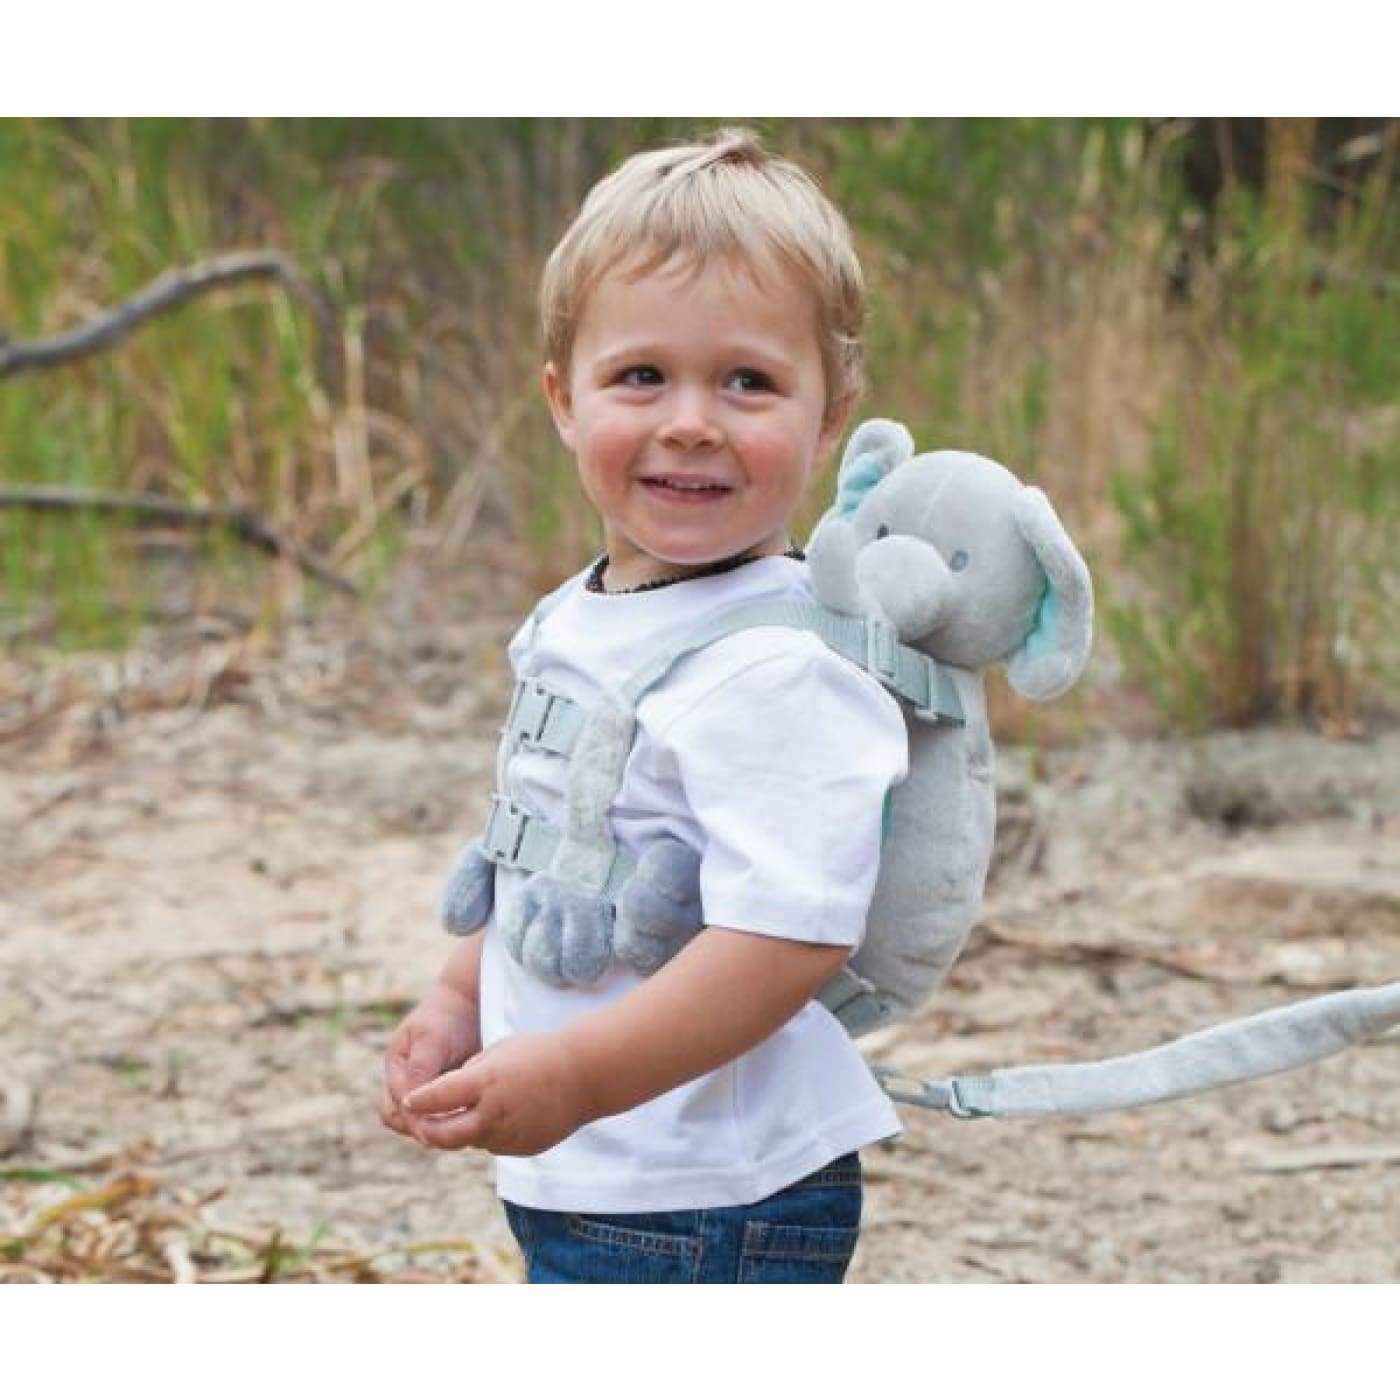 Playette 2 in 1 Harness Buddy - Gatsby Elephant - ON THE GO - SAFETY HARNESSES